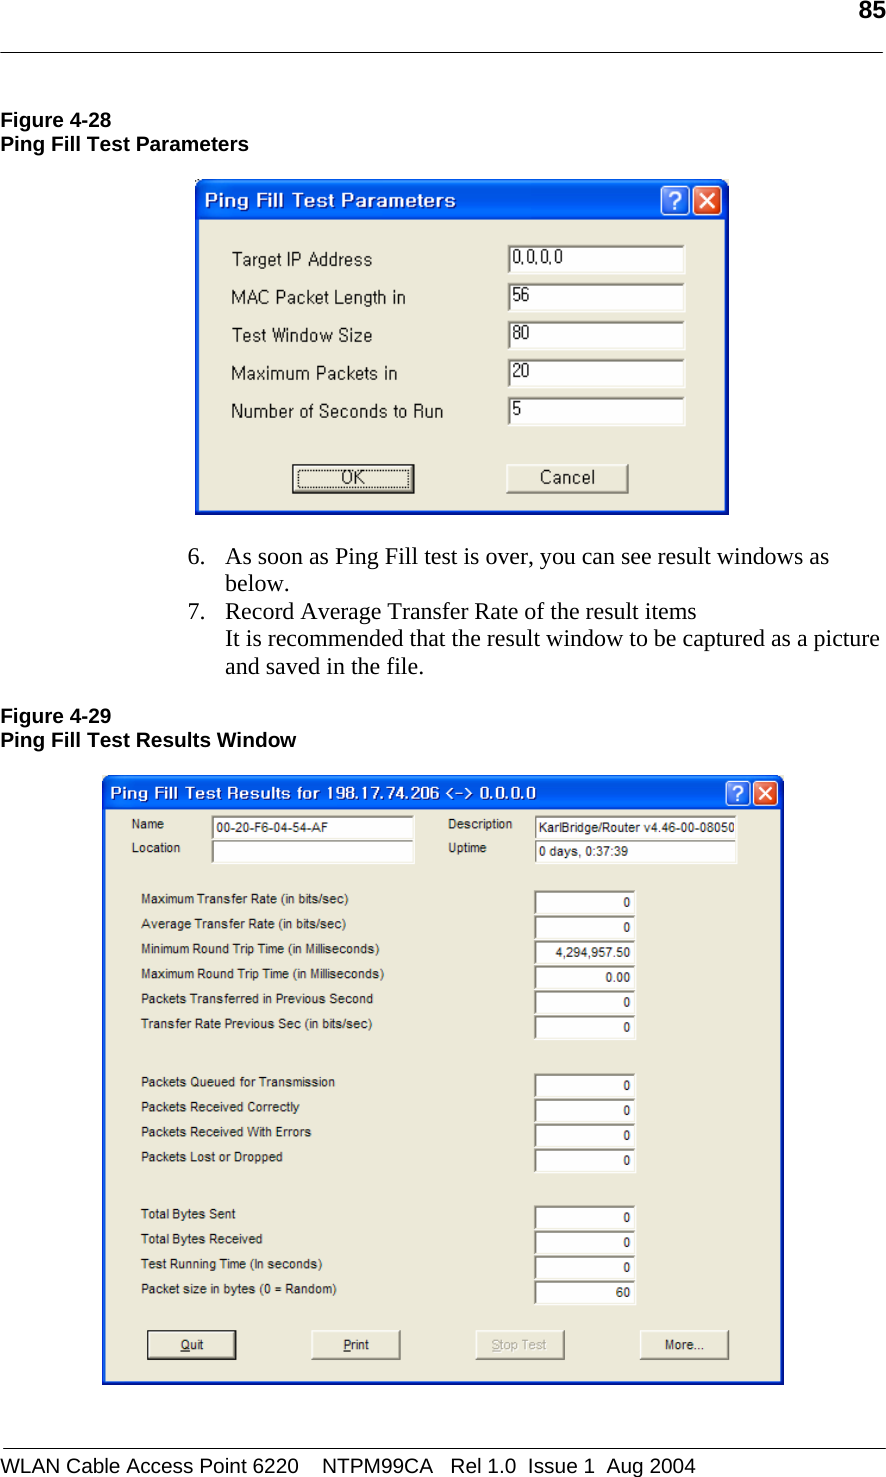   85  Figure 4-28 Ping Fill Test Parameters    6. As soon as Ping Fill test is over, you can see result windows as below. 7. Record Average Transfer Rate of the result items  It is recommended that the result window to be captured as a picture and saved in the file.         Figure 4-29 Ping Fill Test Results Window     WLAN Cable Access Point 6220    NTPM99CA   Rel 1.0  Issue 1  Aug 2004 